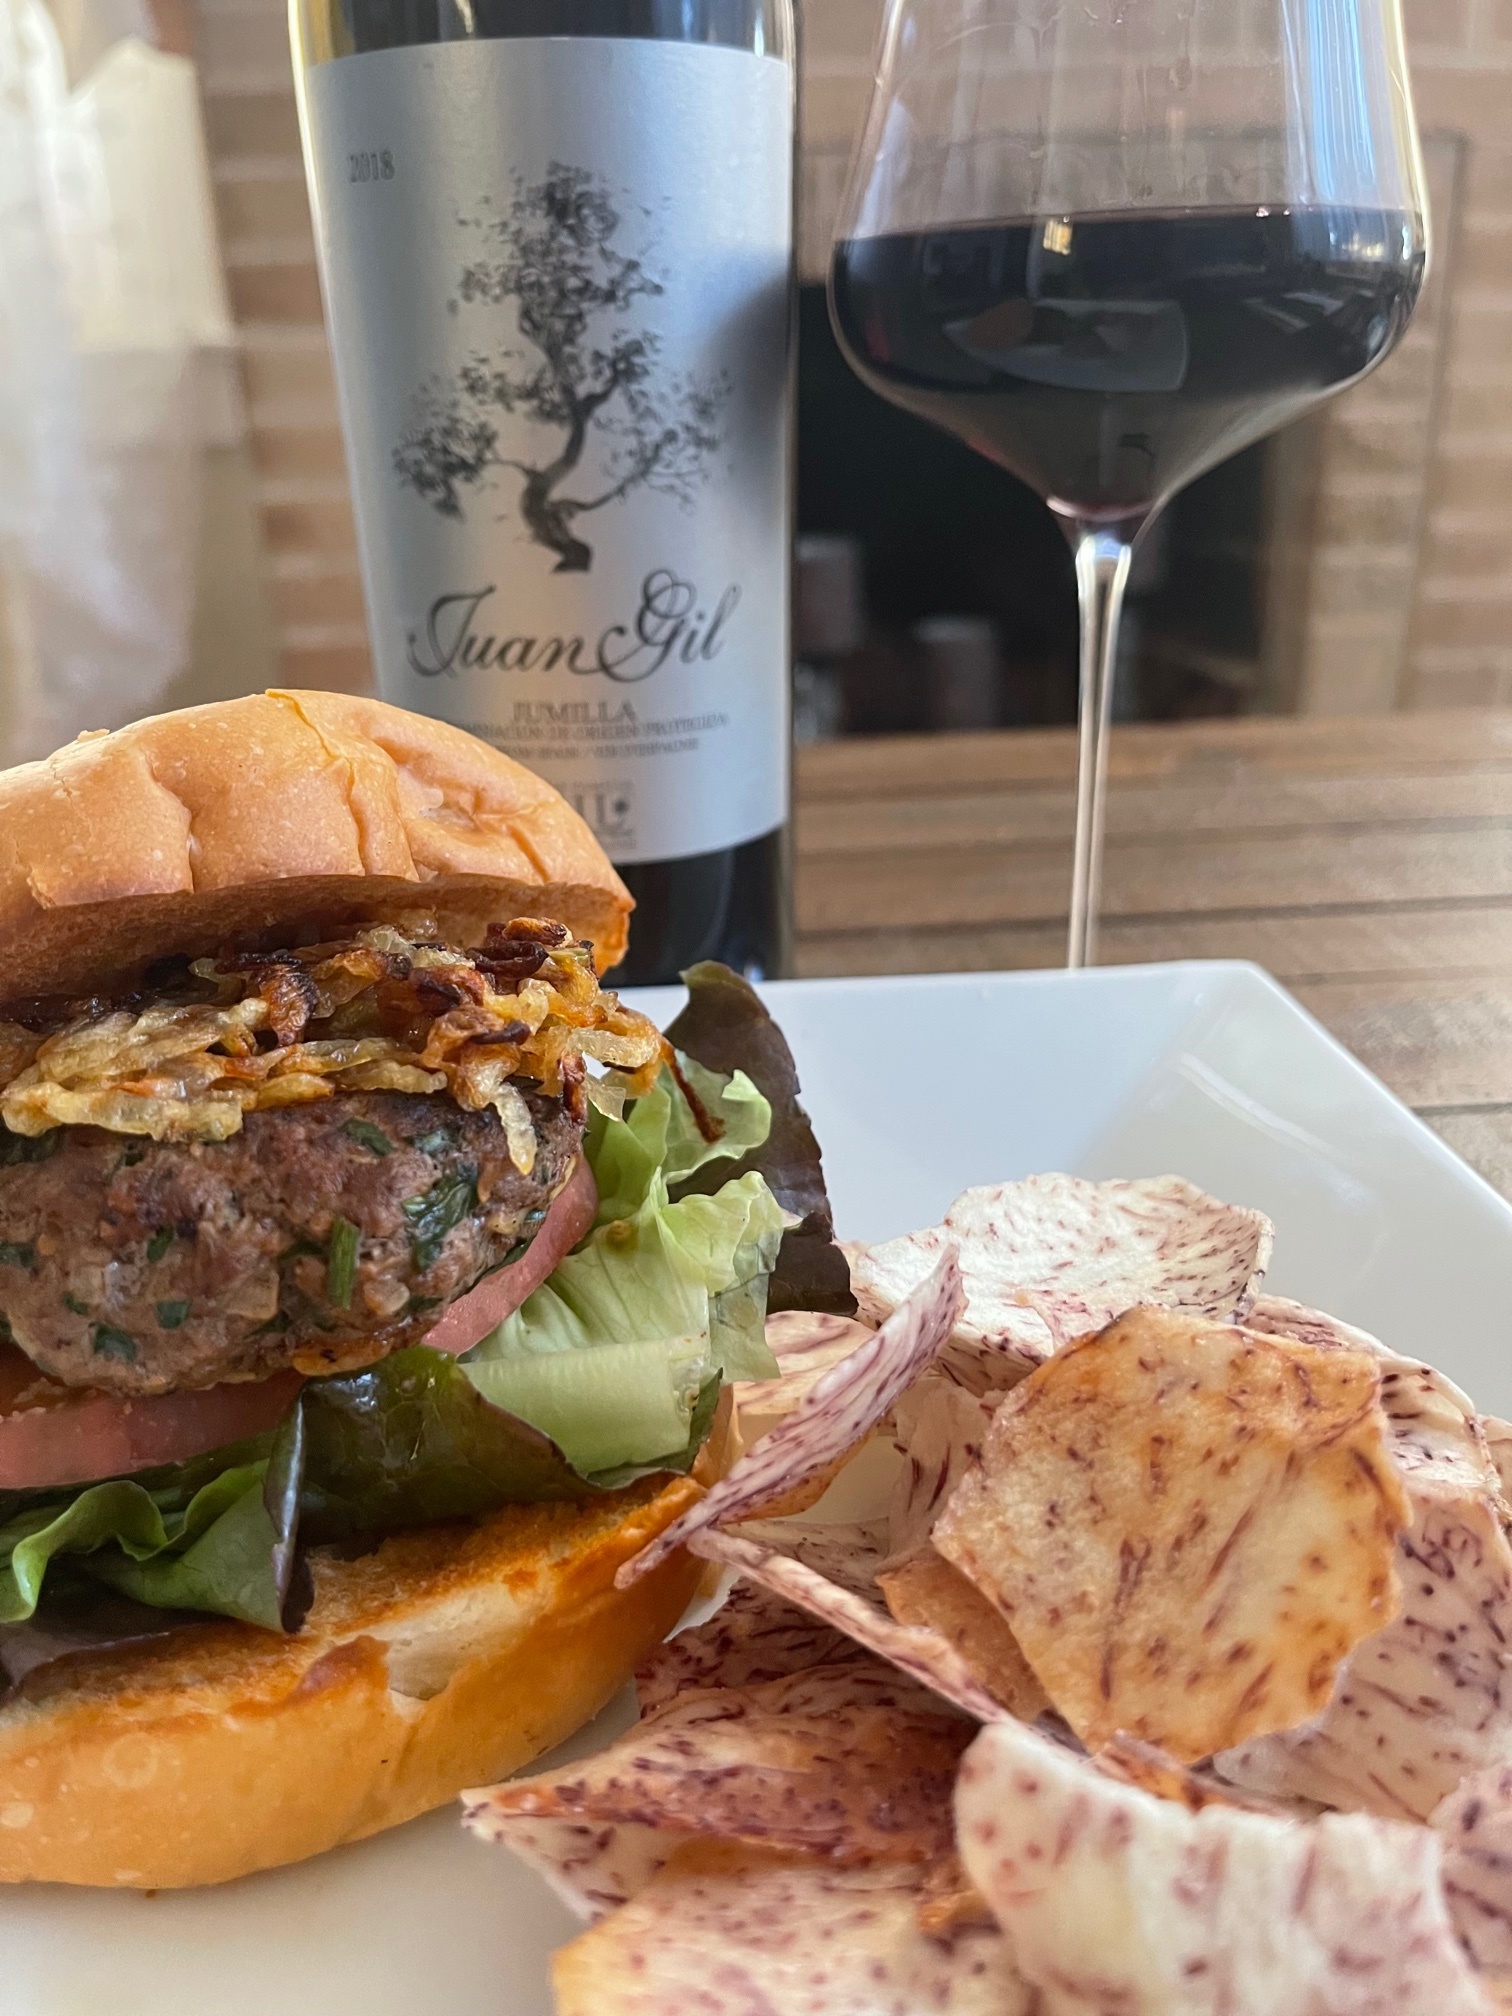 Monastrell from Murcia and Valencia with Lamb-Beef Burgers and El Taberno  #WorldWineTravel